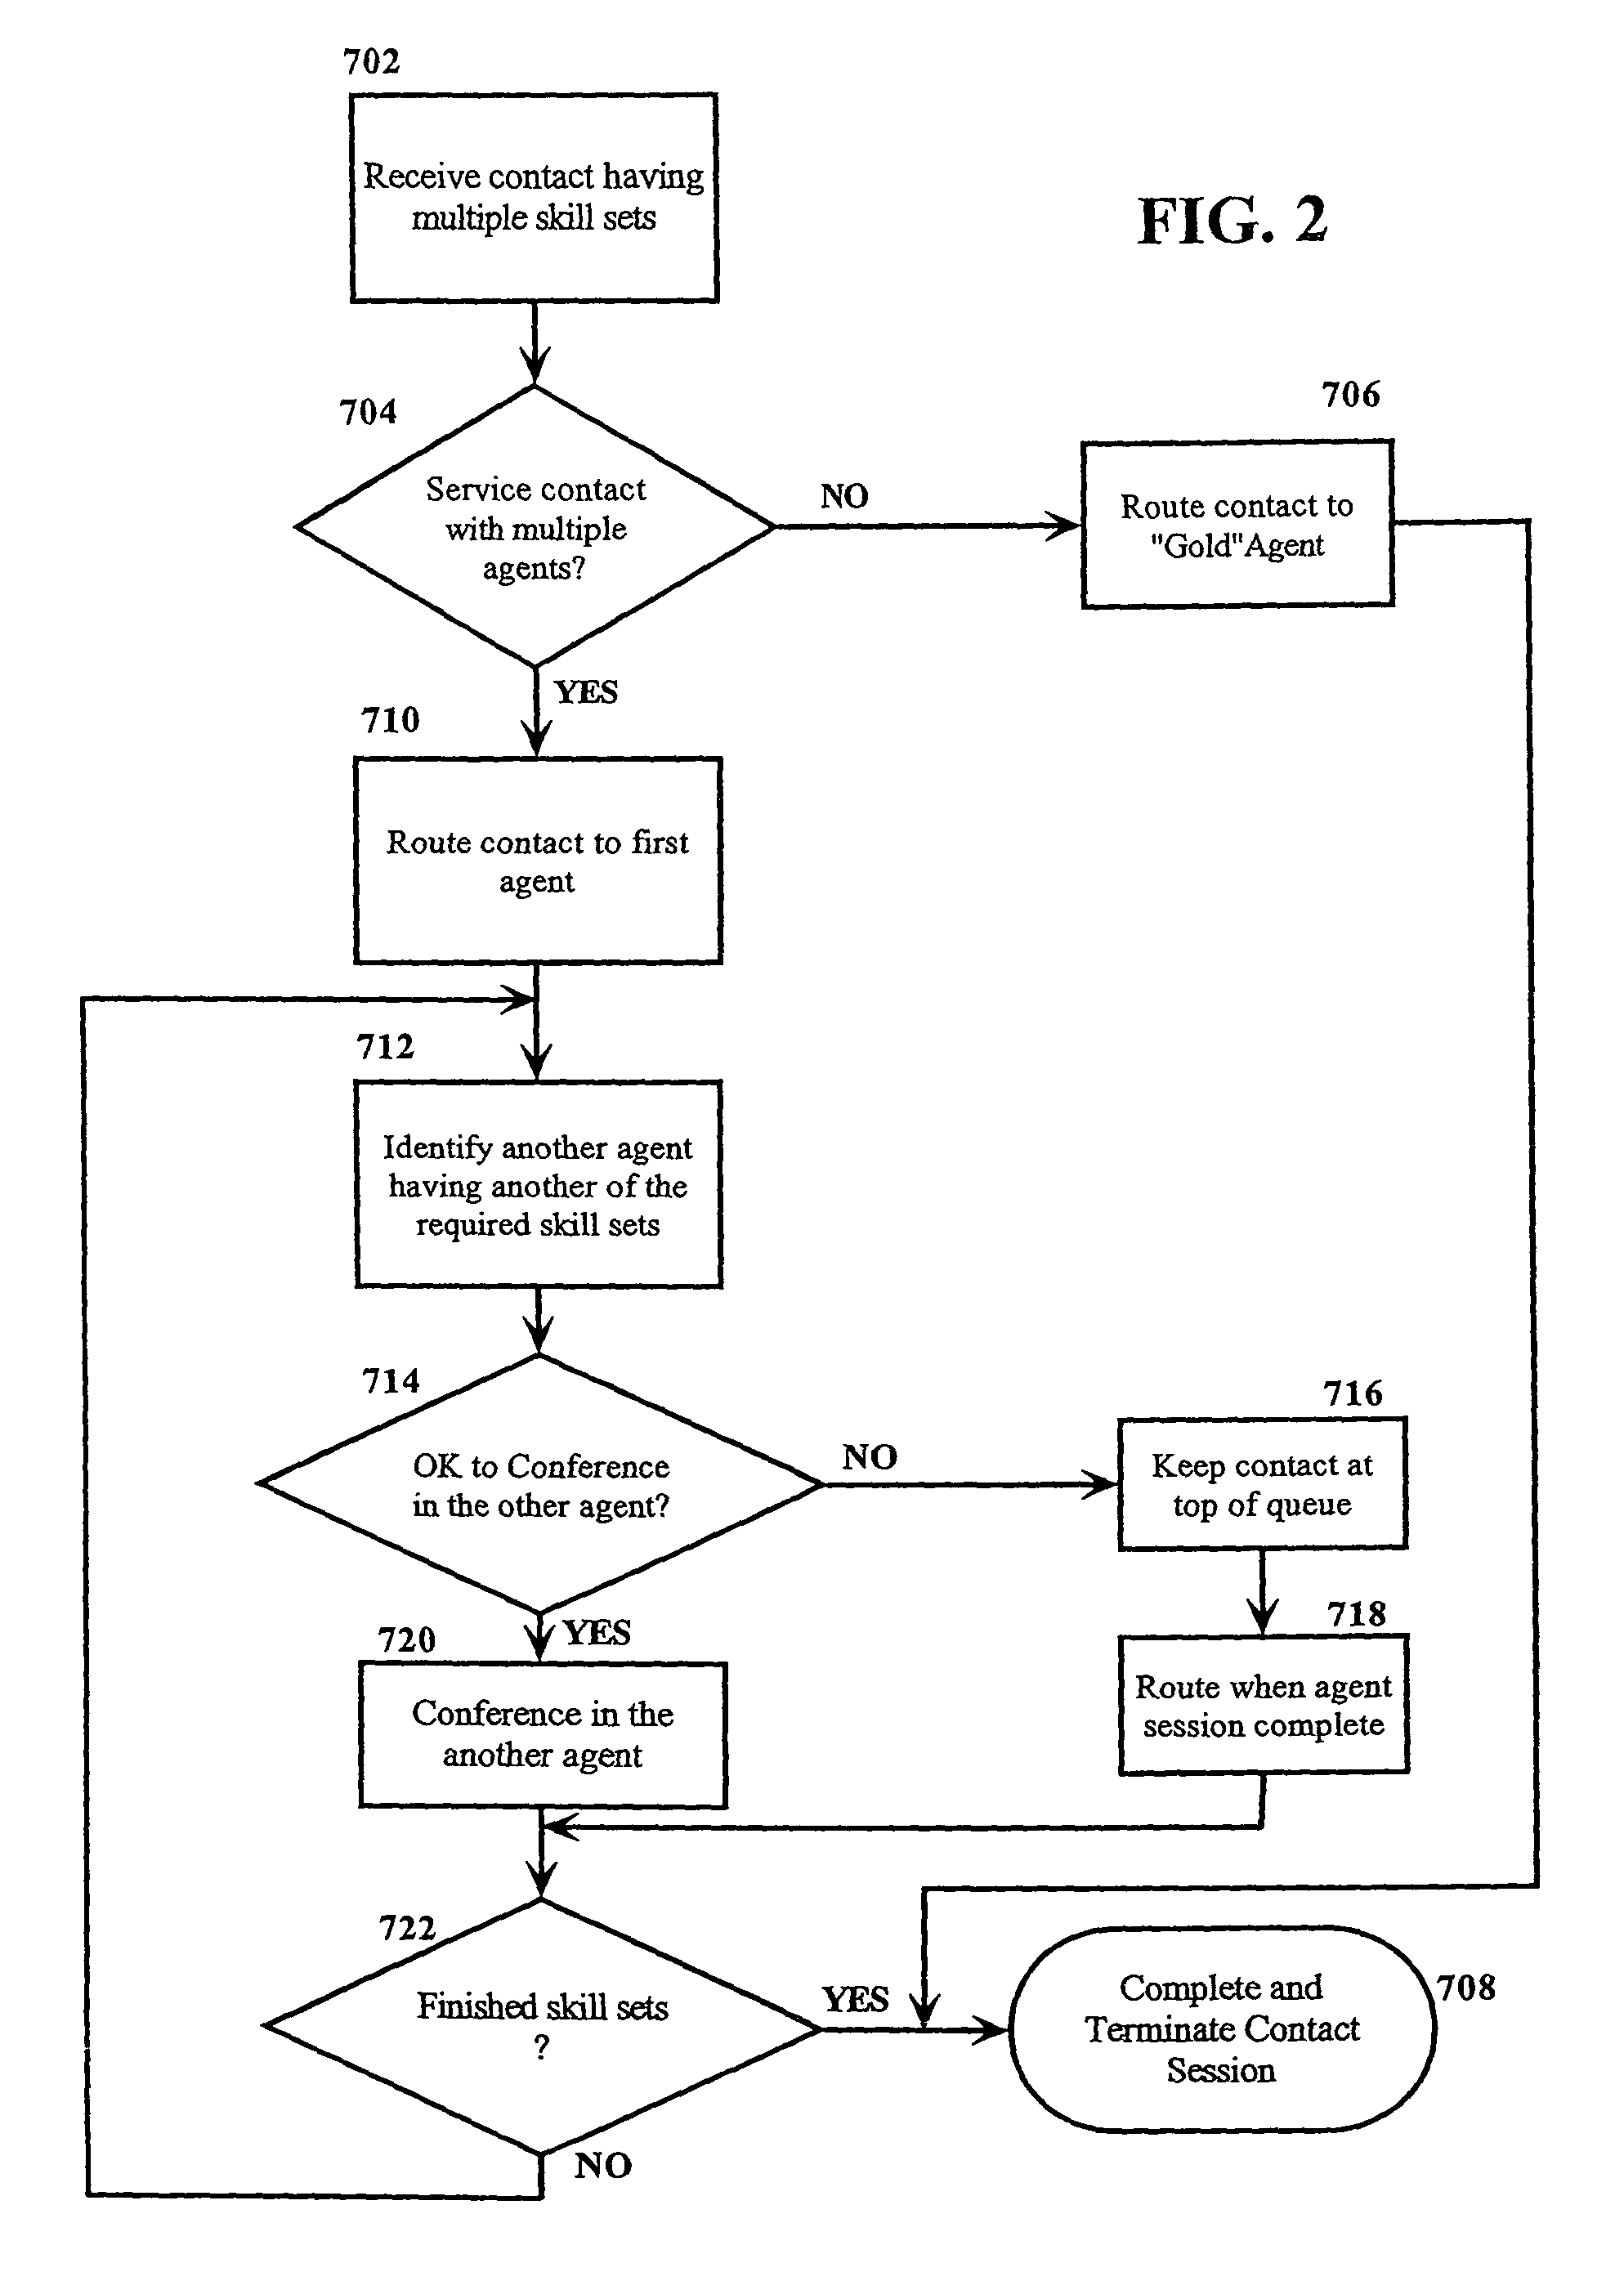 Method and system for management of queues in contact centers